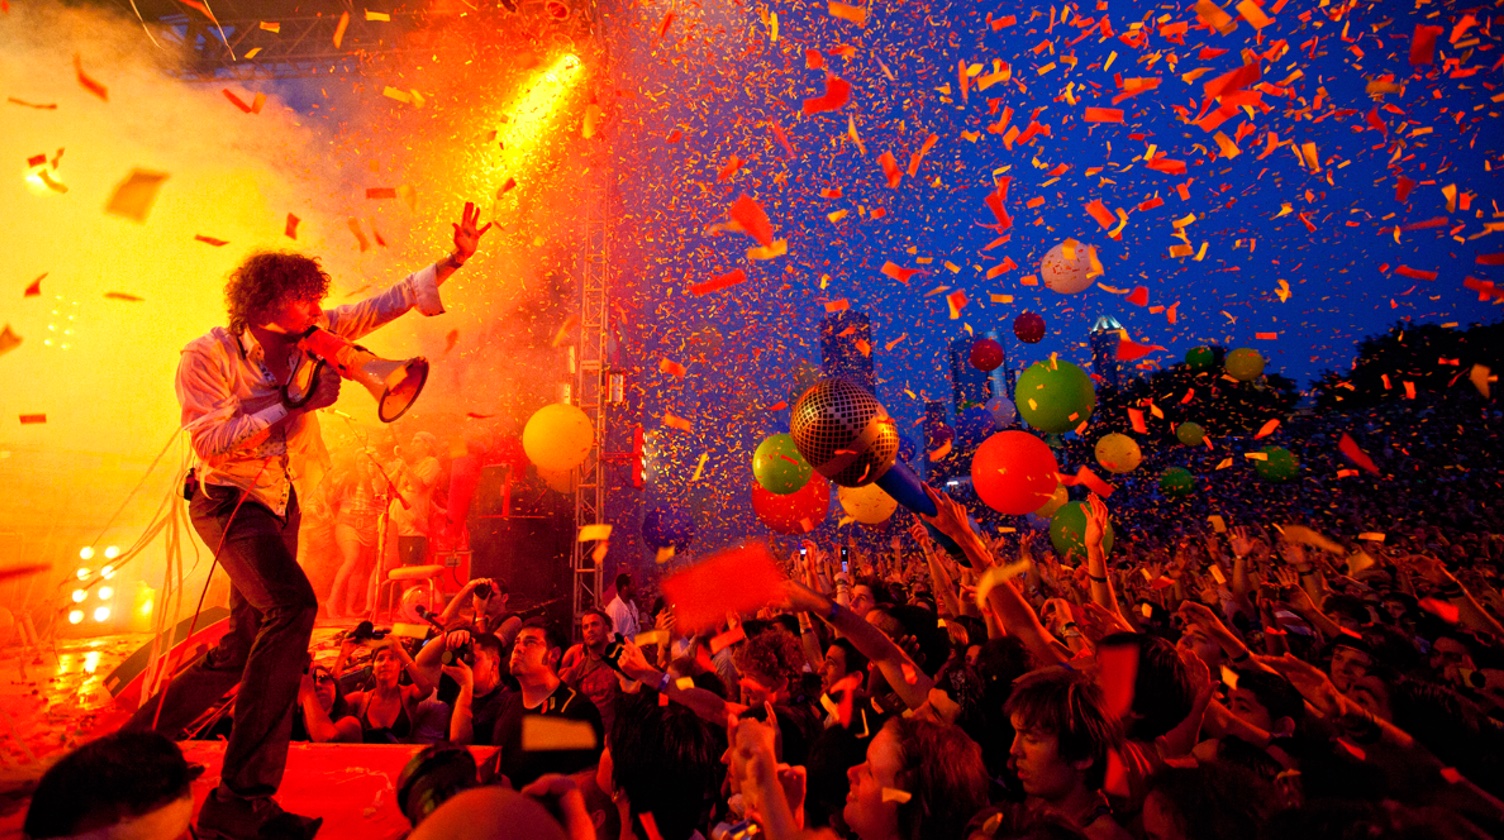 HQ Flaming Lips Wallpapers | File 529.99Kb